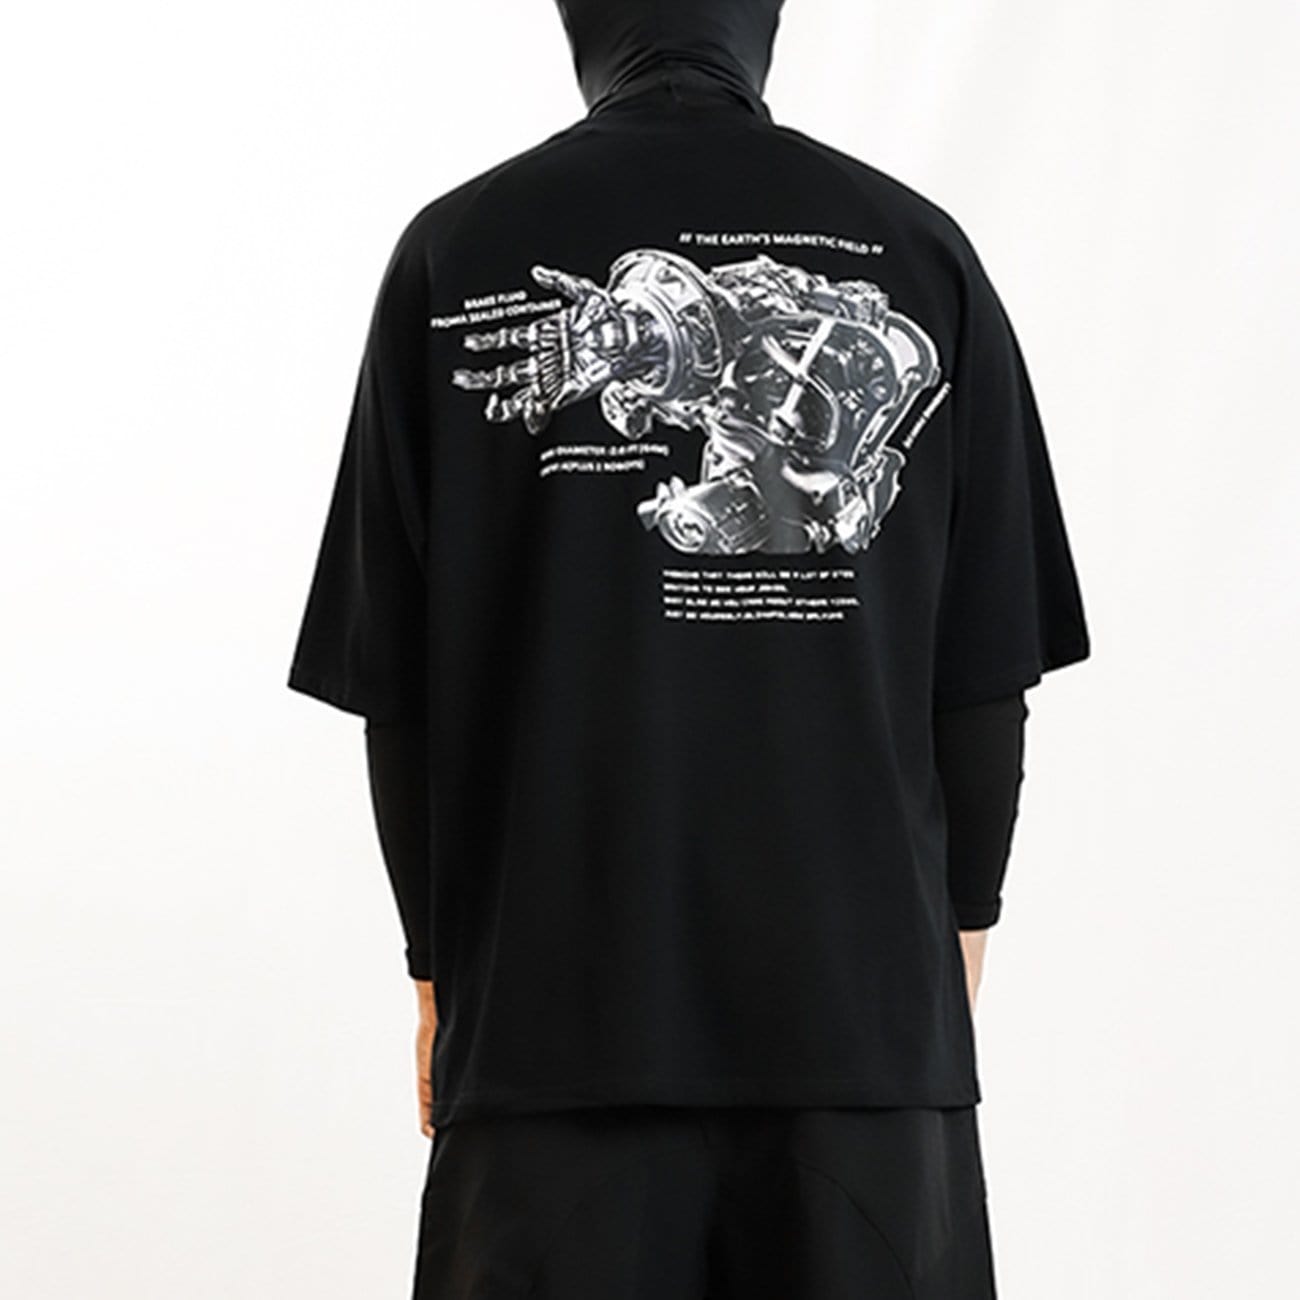 WLS Three-dimensional Tech Graphic Tee